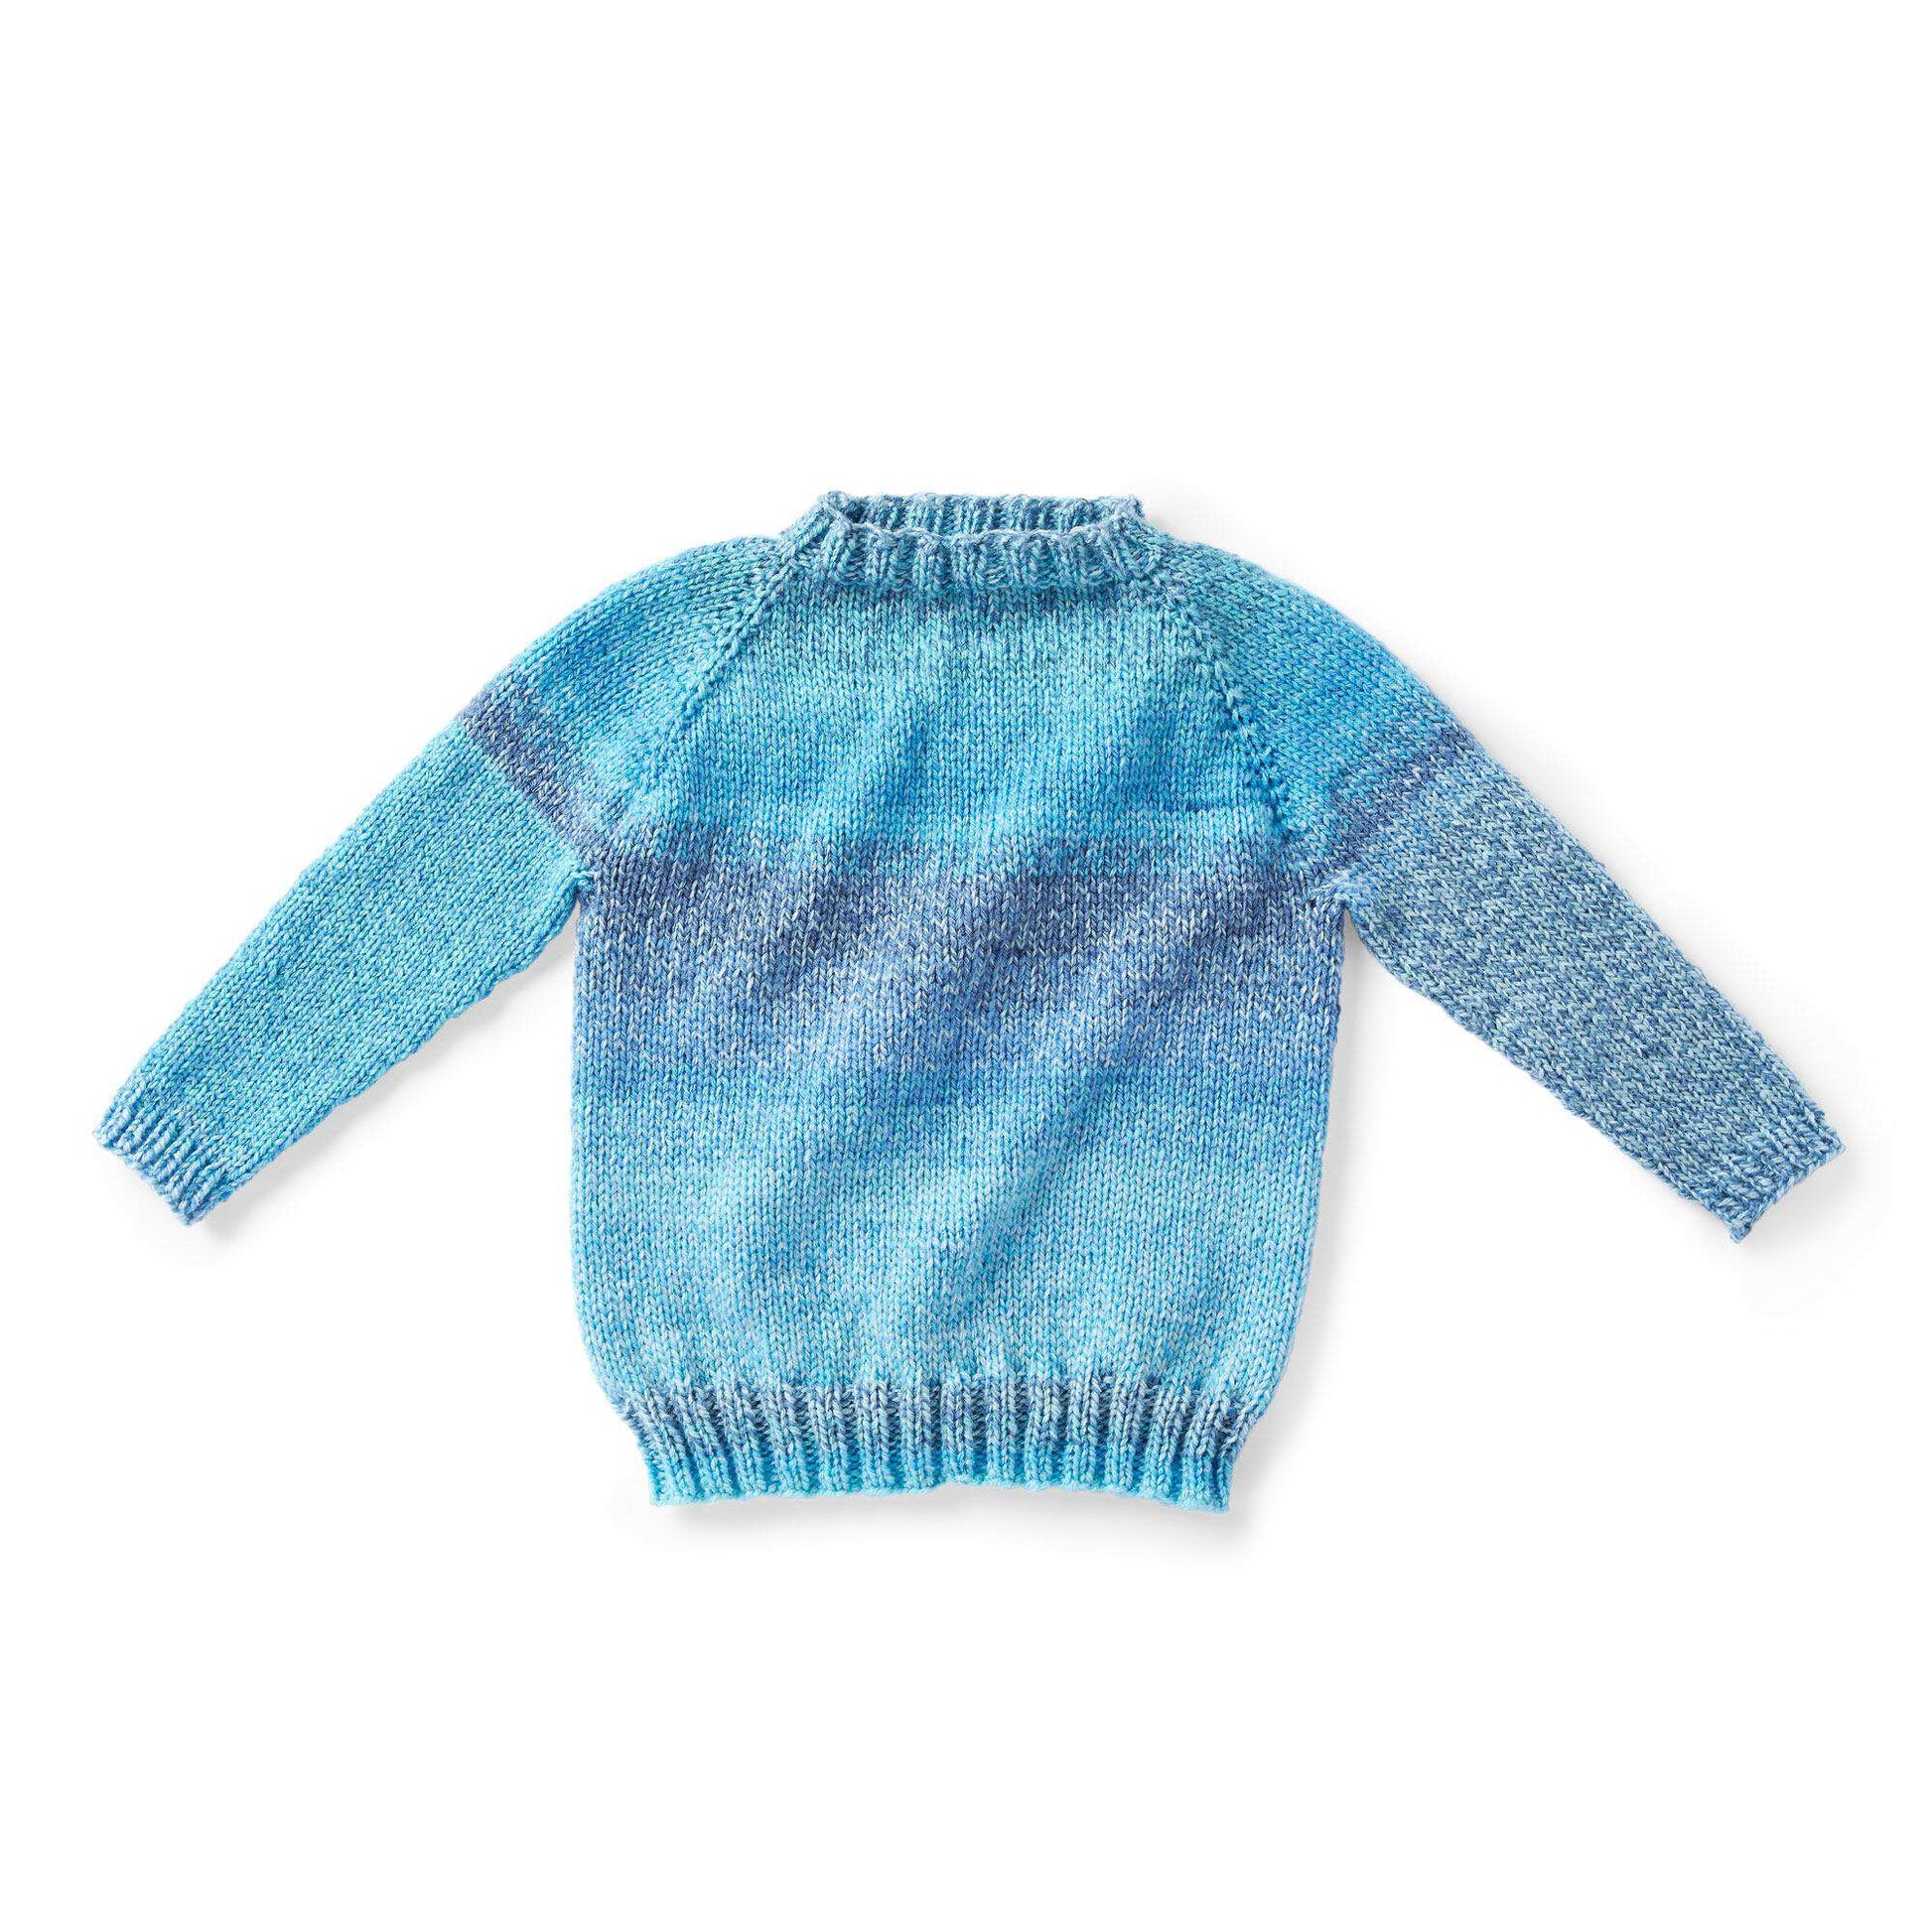 Free Red Heart Childs Top Down Knit Pullover Pattern